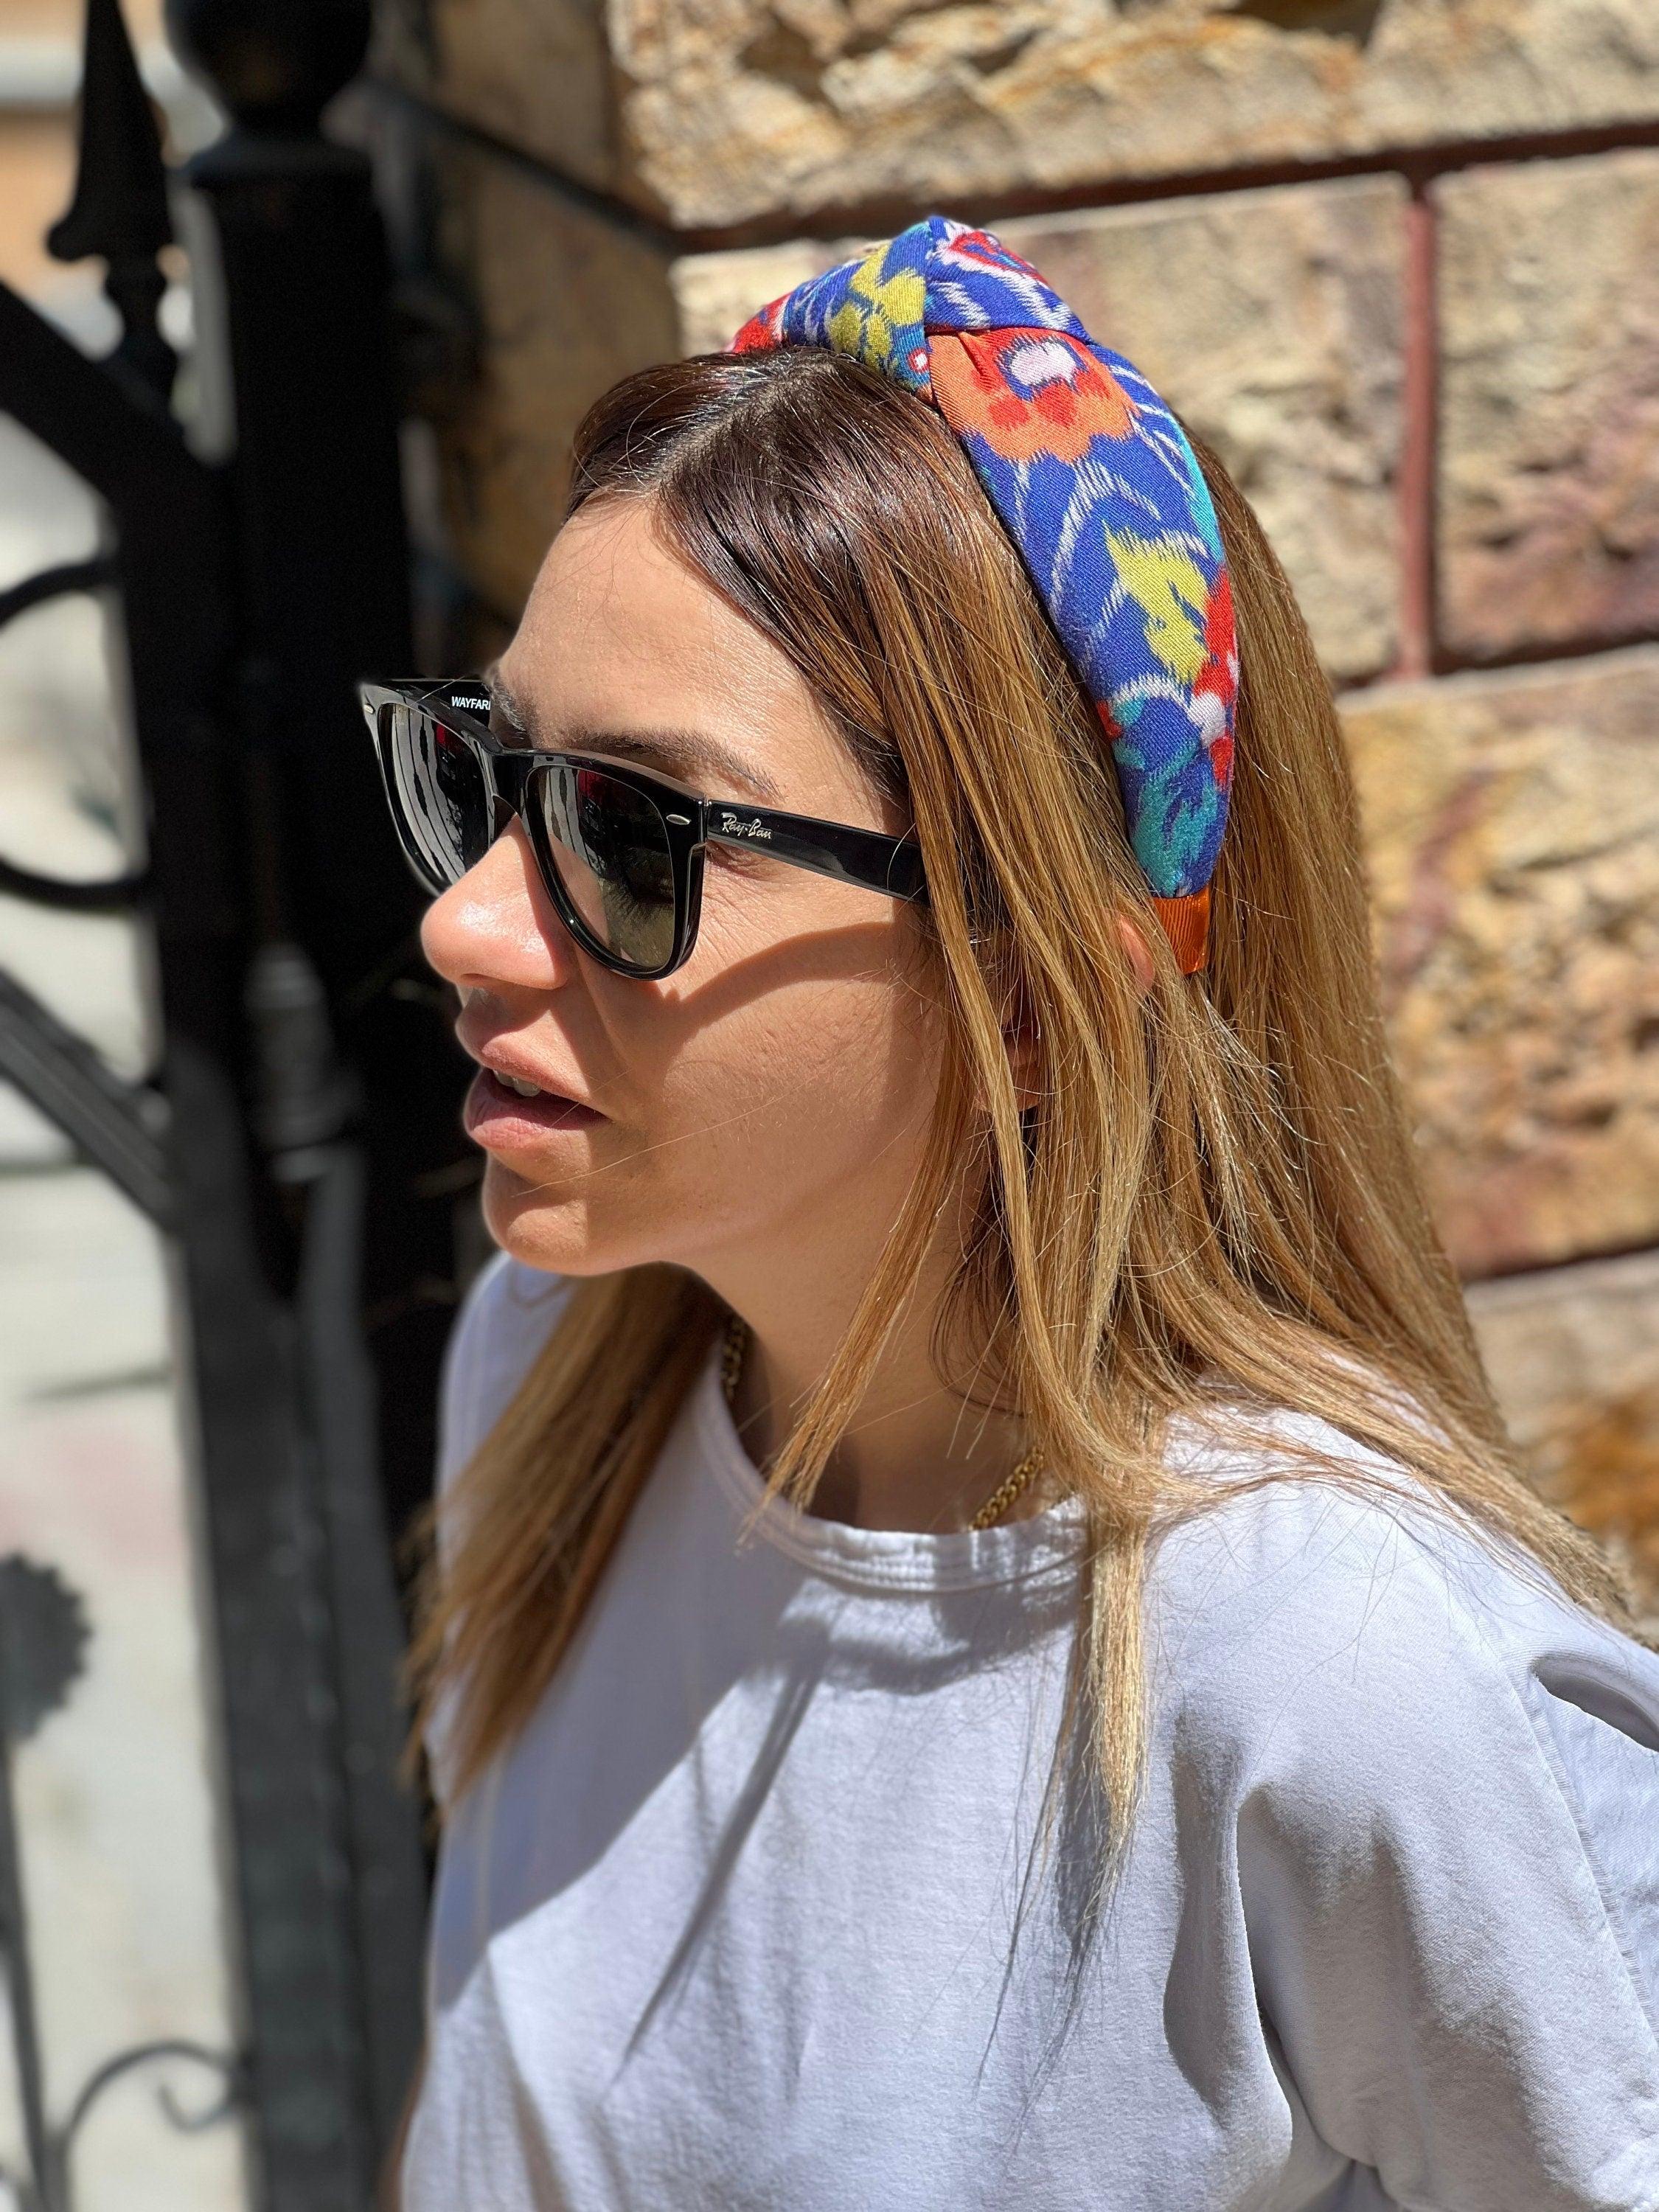 Charming Ethnic Pattern Knotted Headband in Blue, Pink, and Yellow - Wide and Stylish Women's Hairband with Cotton Padding available at Moyoni Design